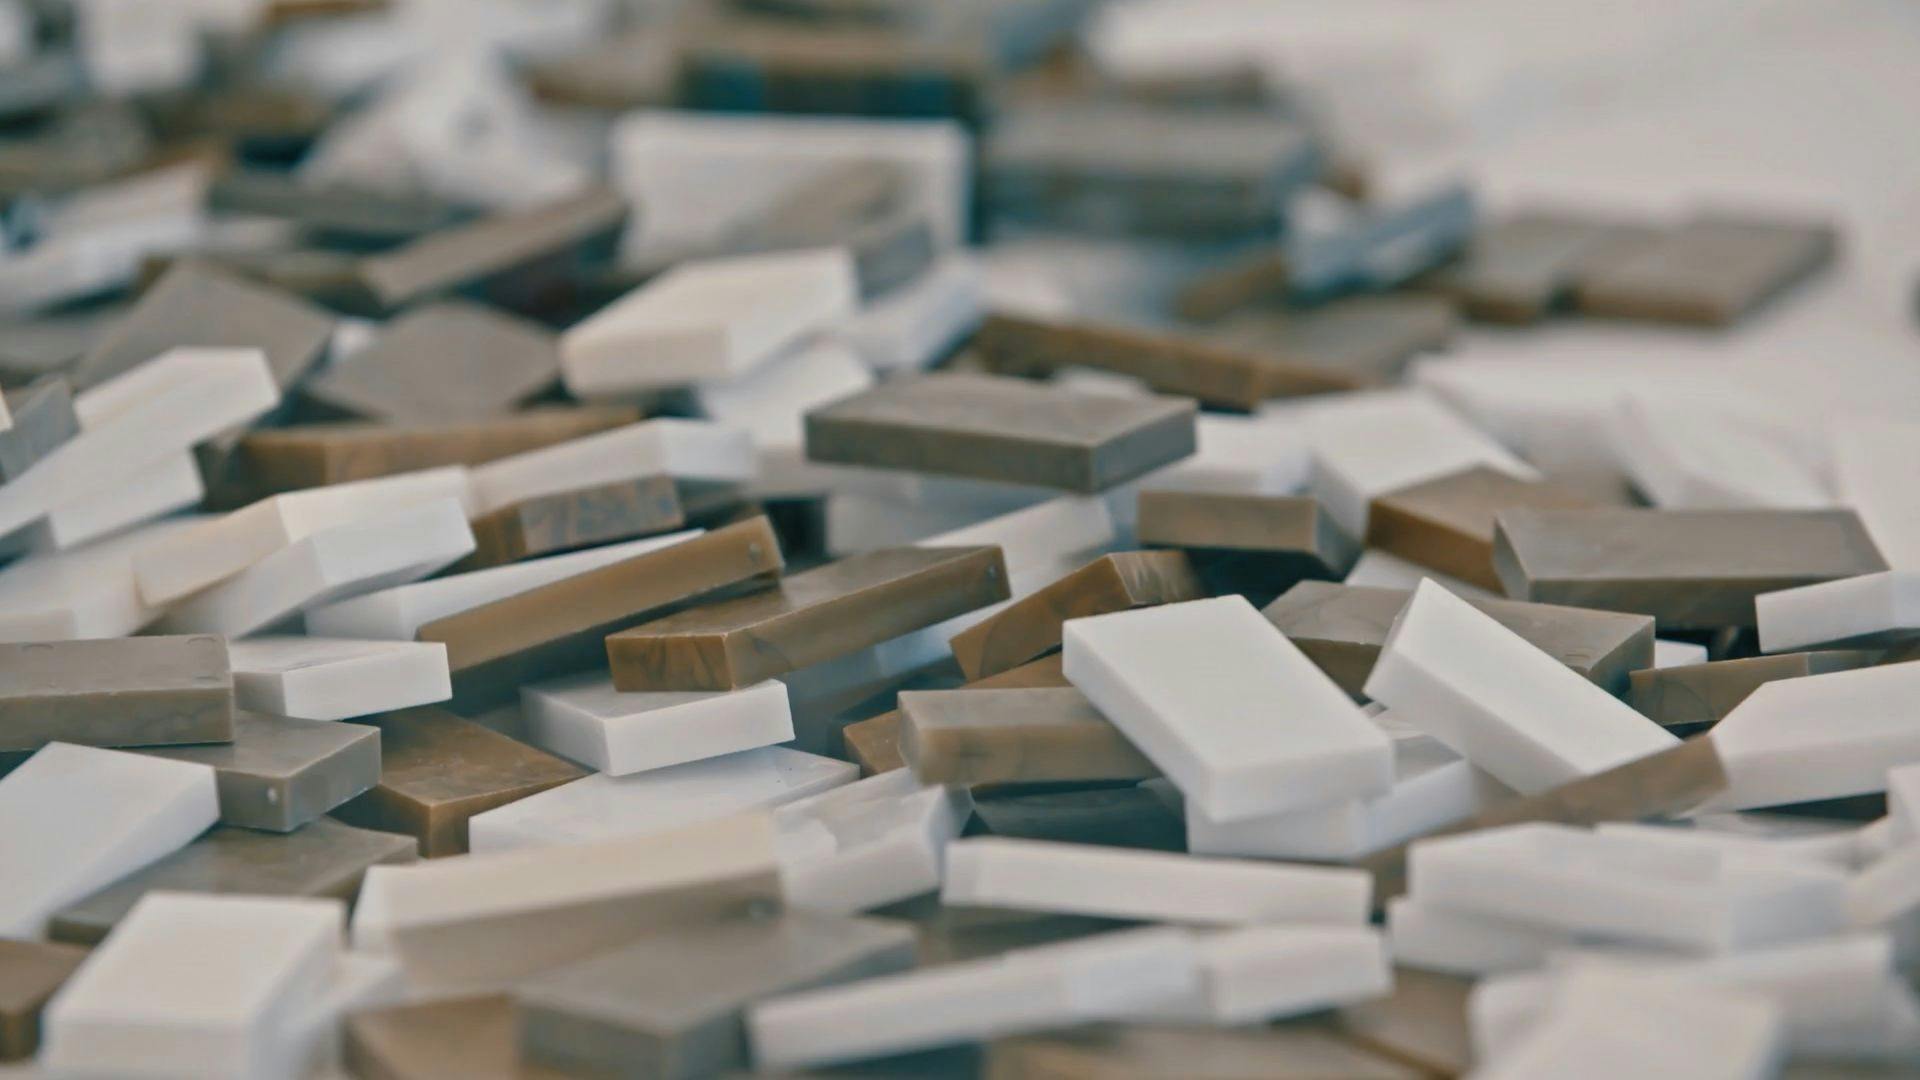 A pile of white and golden dominoes